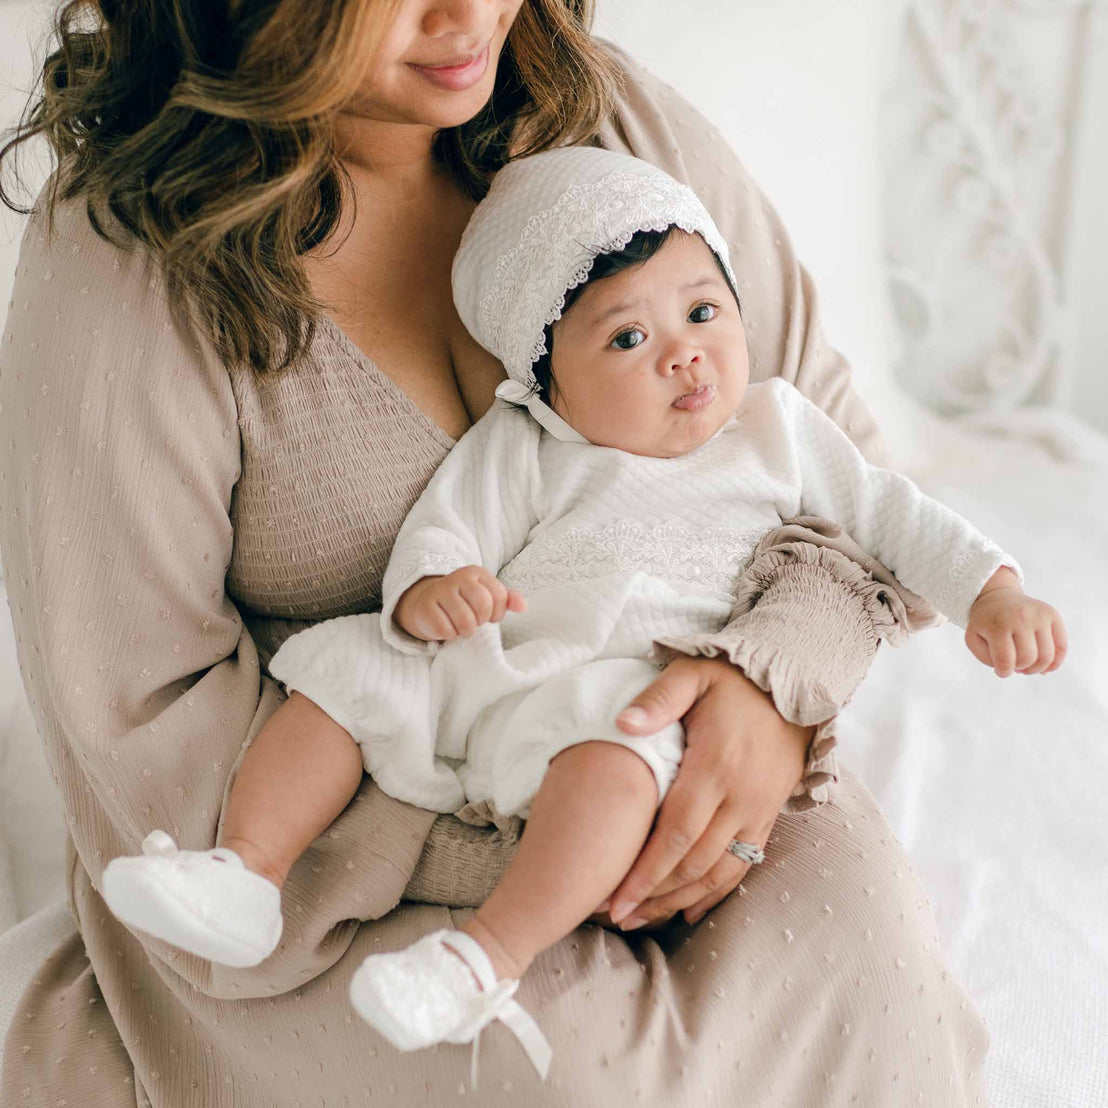 A woman in a beige dress holds a baby dressed in a Madeline Quilted Newborn Romper and a lace bonnet. The baby is looking slightly to the side with a neutral expression. They are seated in a softly lit, neutral-colored room.